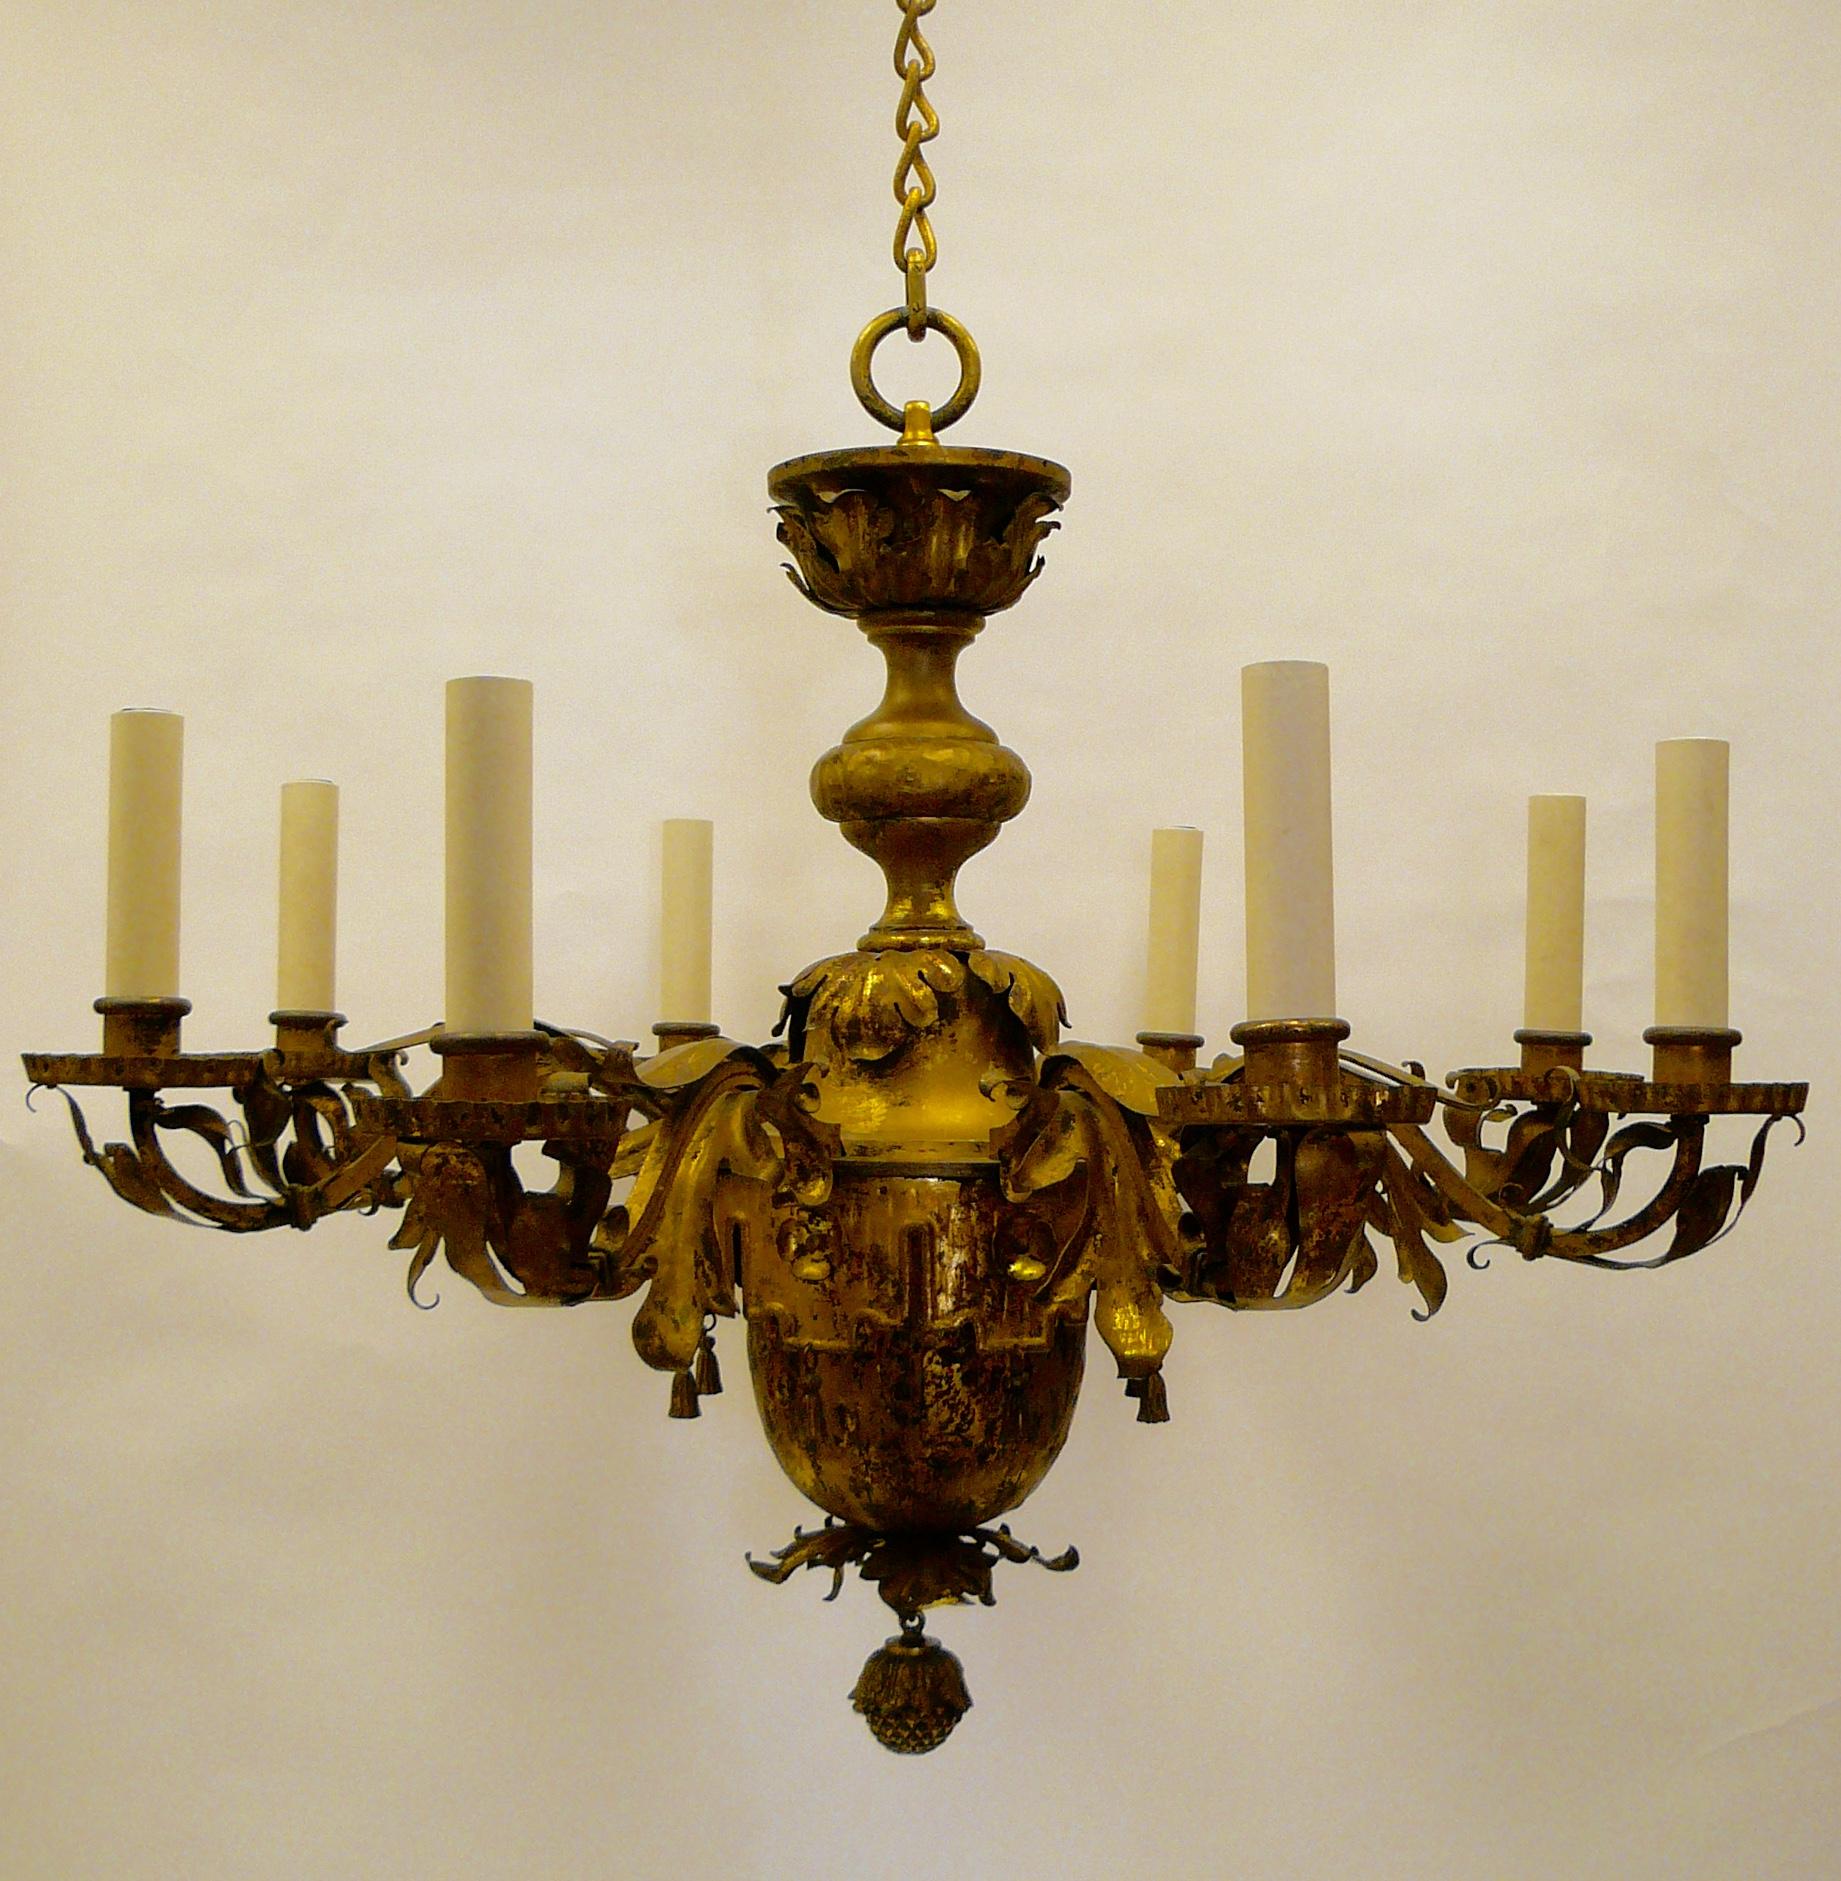 Attributed to E. F. Caldwell, the handmade early Georgian style fixture features foliate arms with a lambrequin and tassel decorated central urn form body.